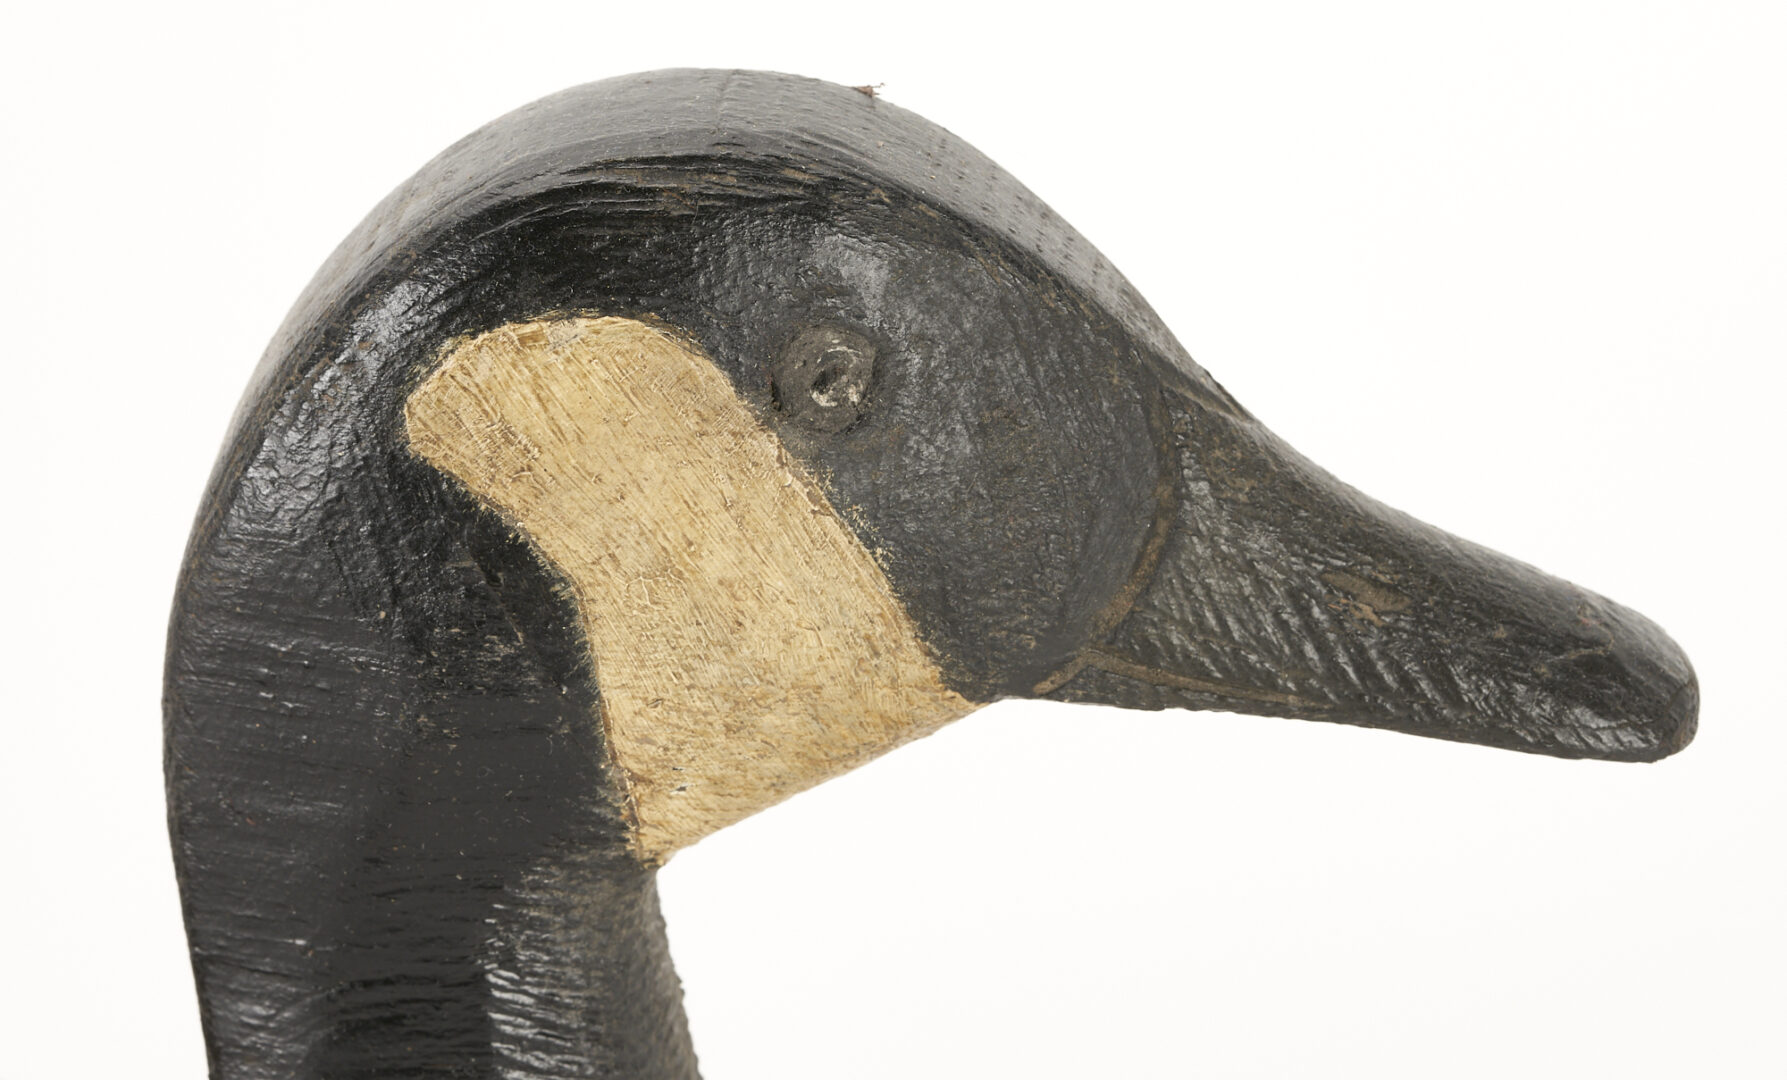 Lot 632: 9 Carved & Painted Canadian Geese  Decoys